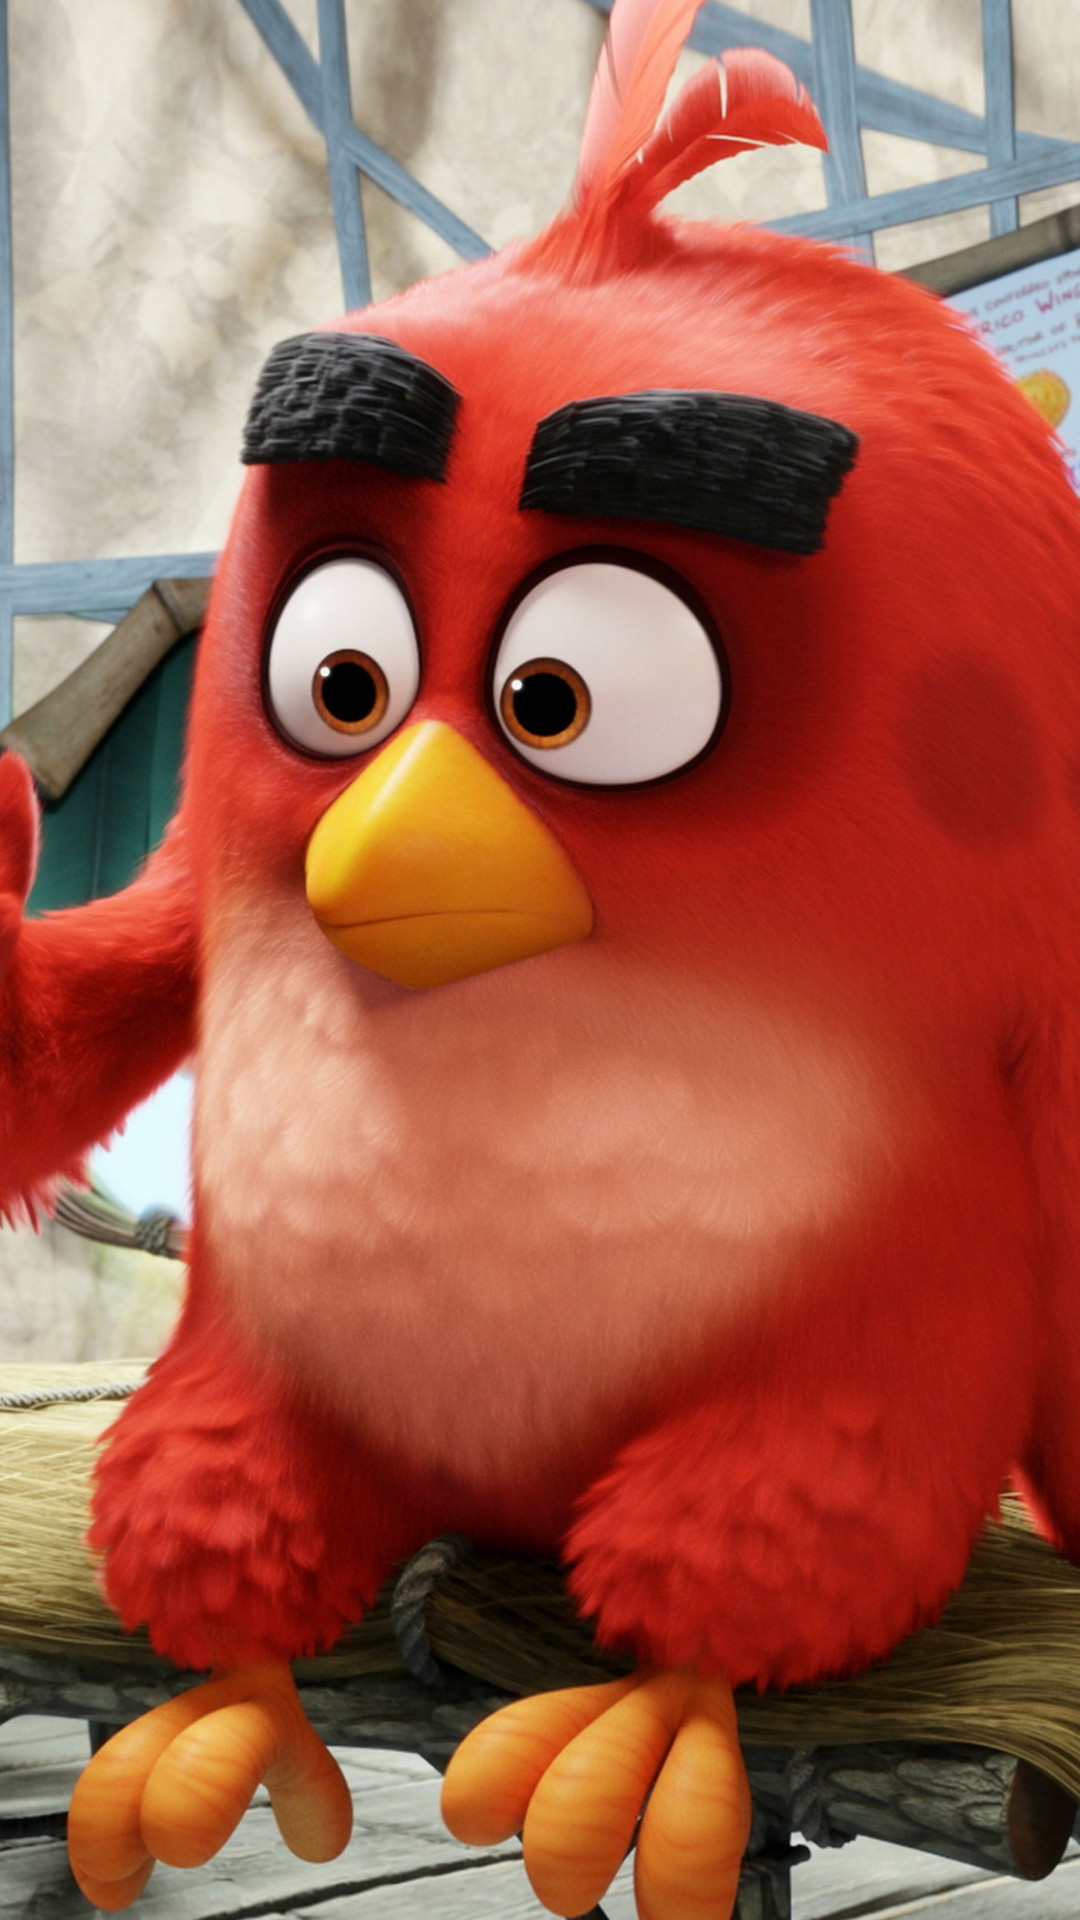 Wallpaper Angry Birds Windows 7 1920x1080 Full HD 2K Picture Image